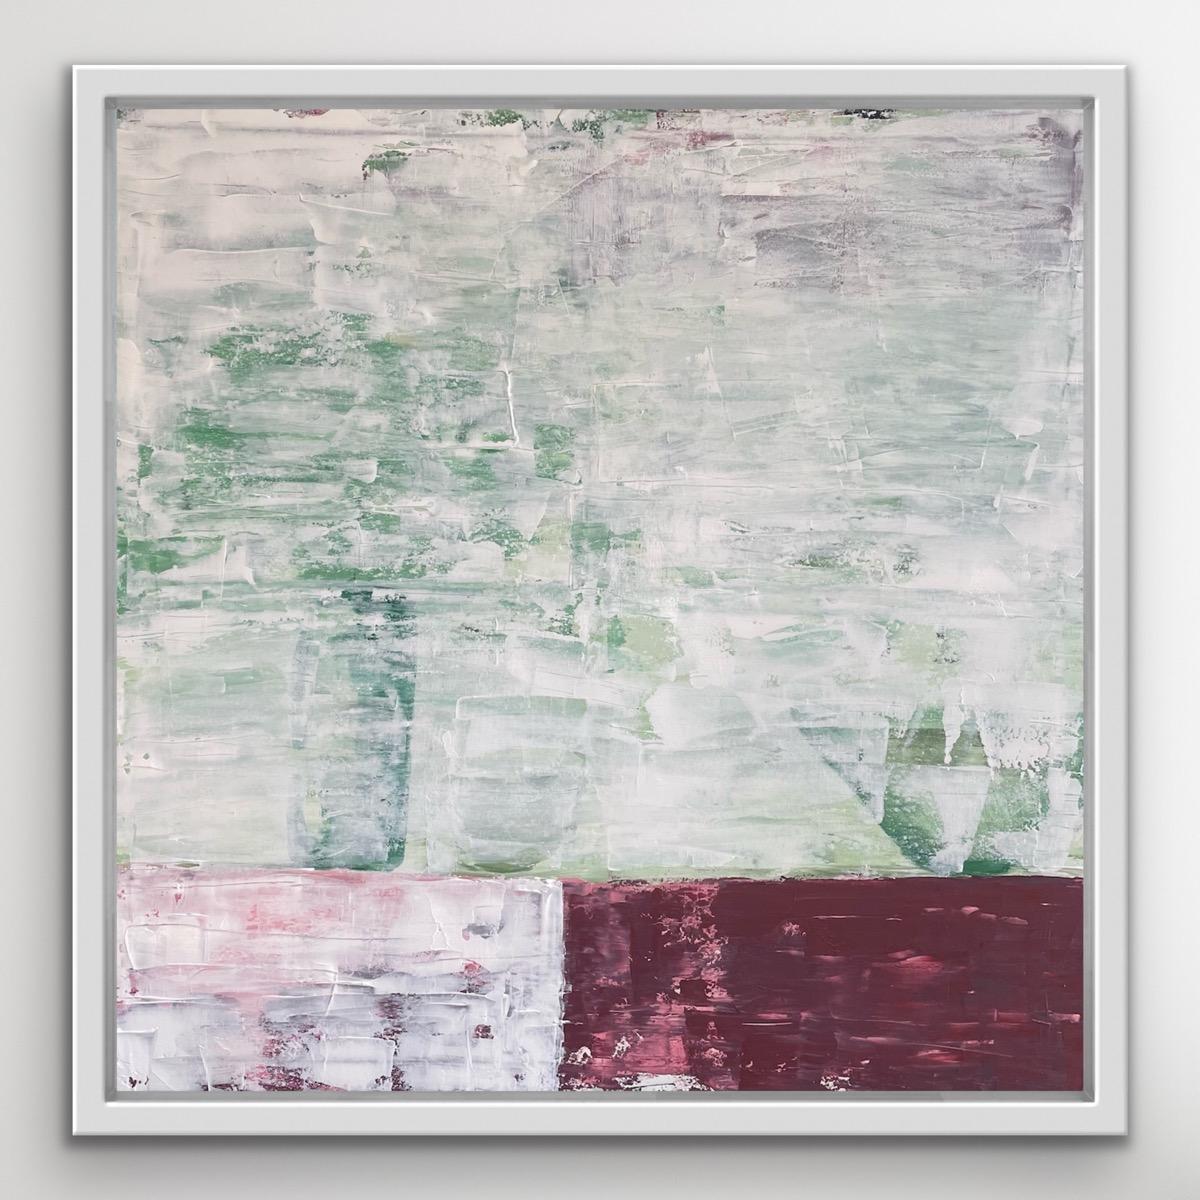 Three Vessels by Fleur Park [2022]
Please note that insitu images are purely an indication of how a piece may look
'Three Vessels' is an original abstract painting by artist Fleur Park which takes inspiration from Gerhard Richter, the fields around